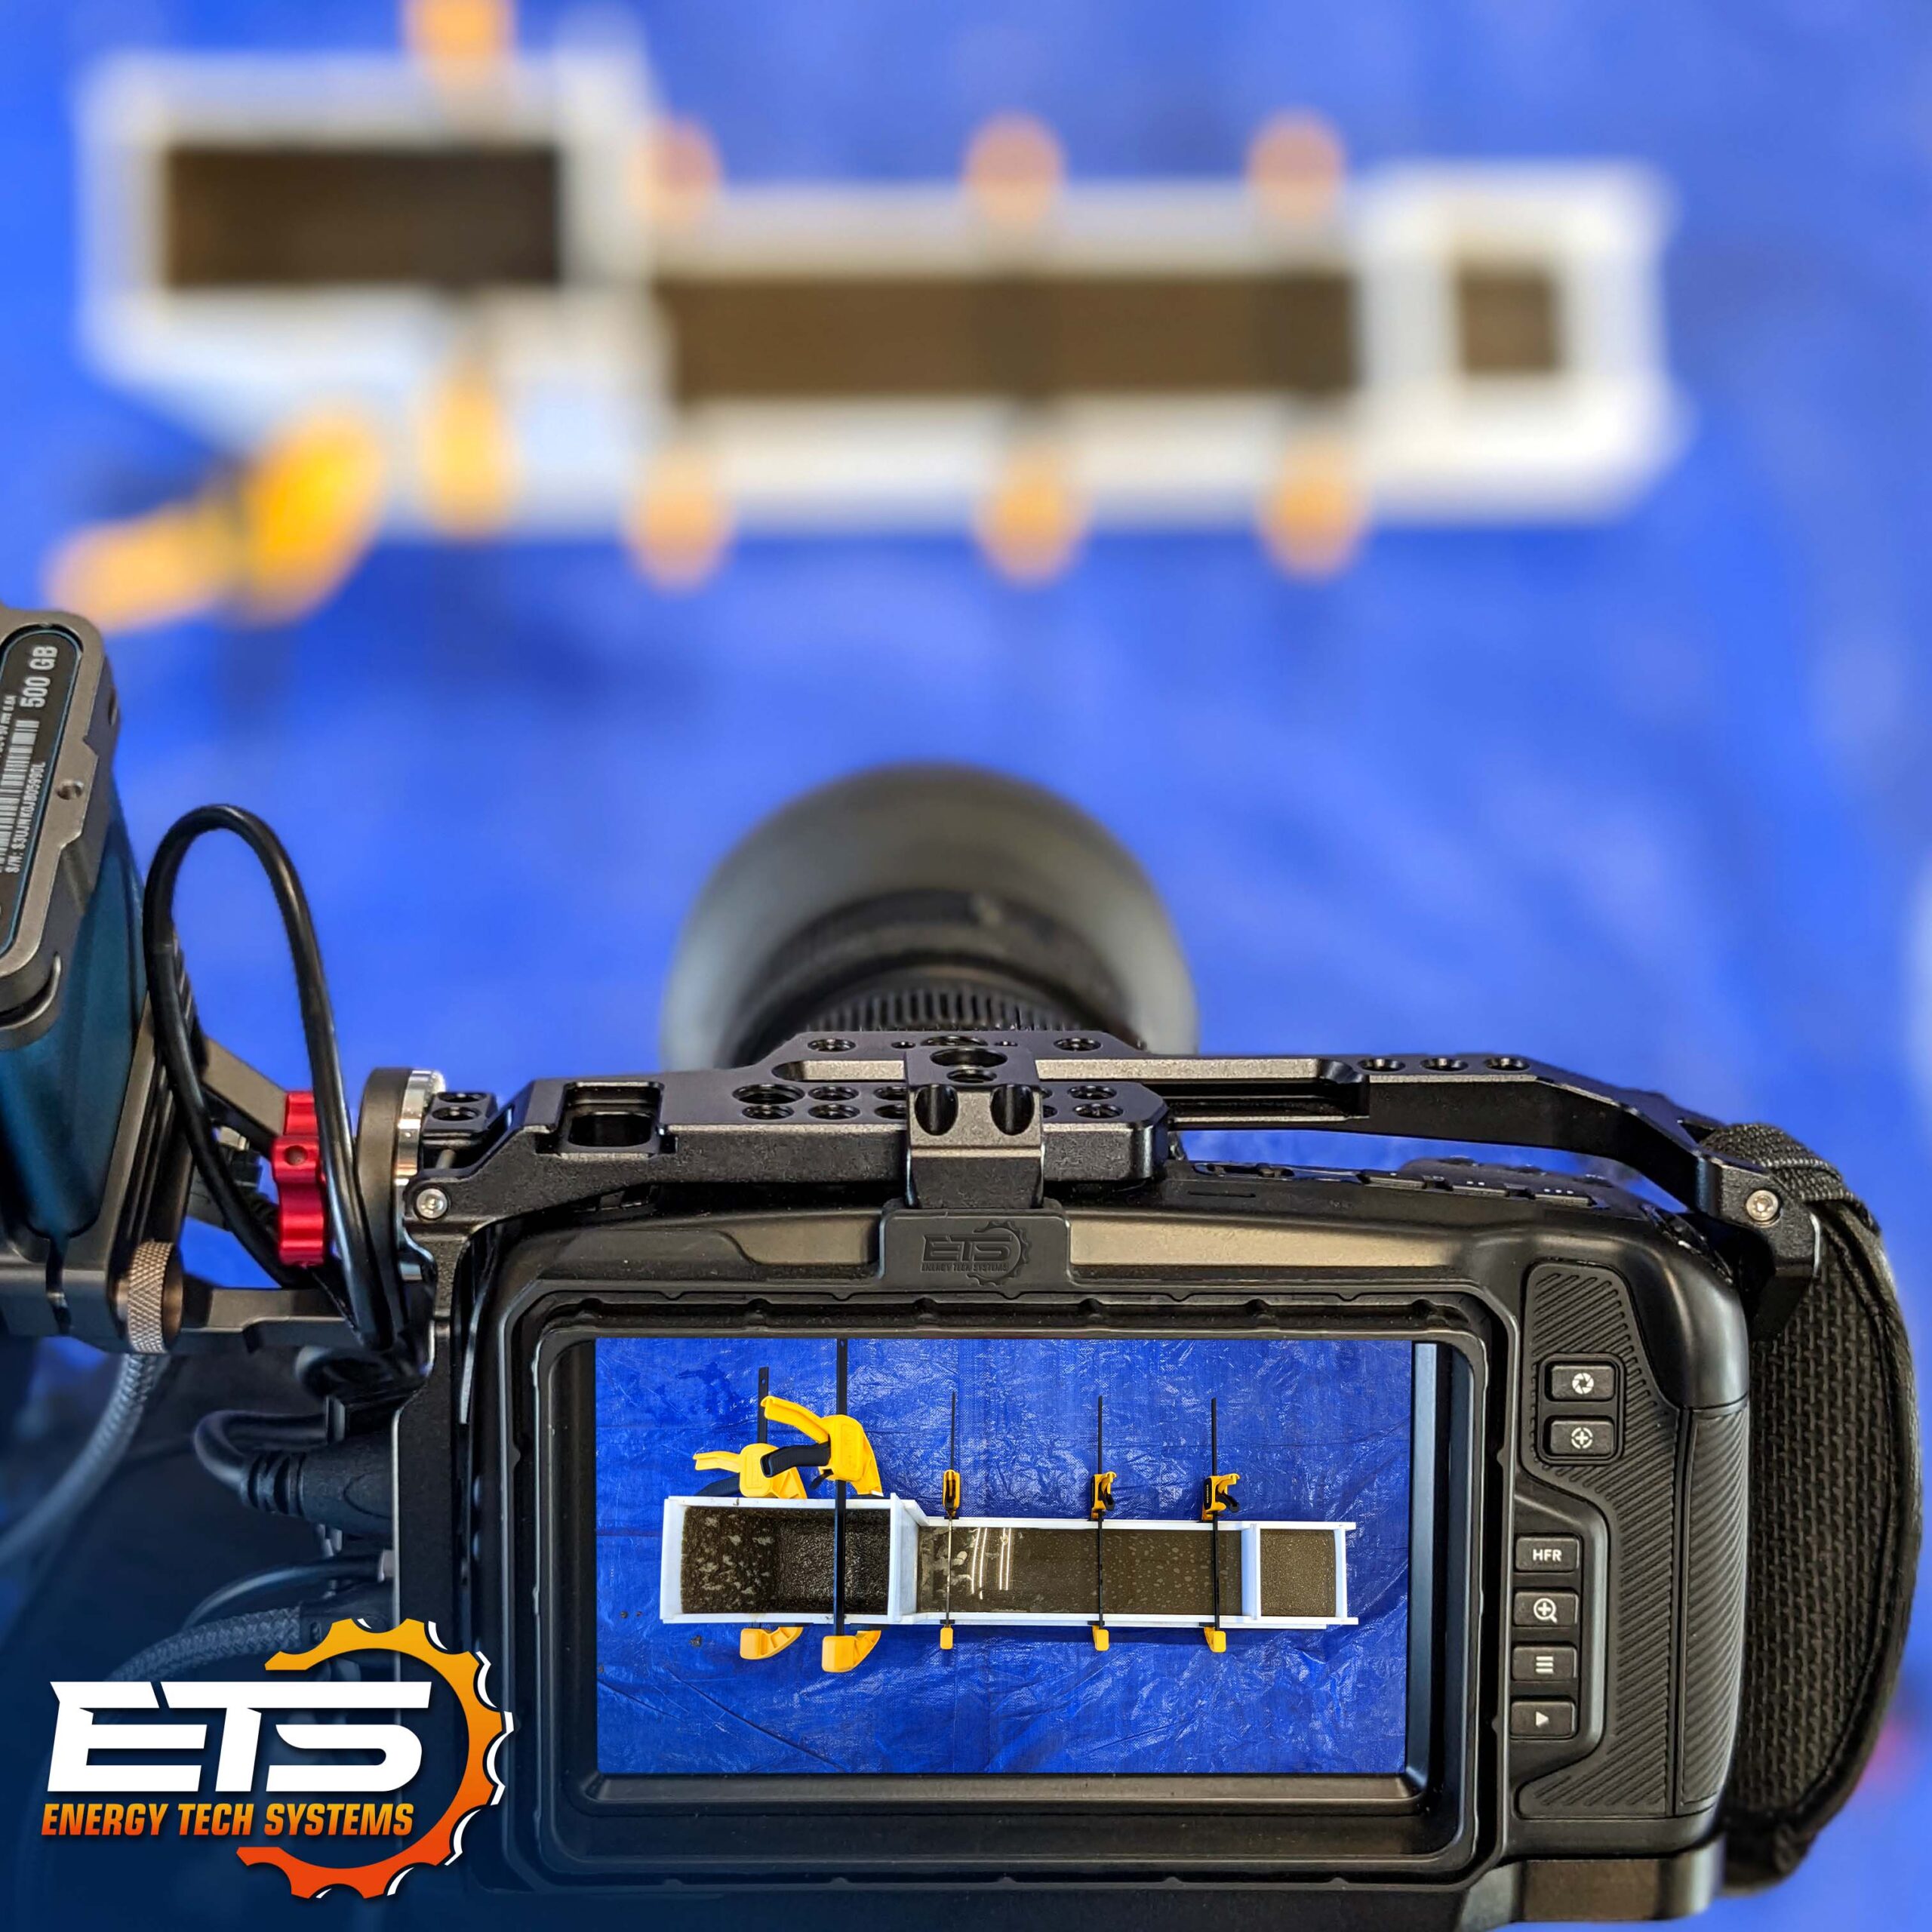 A camera filming the epoxy grout flow box test.